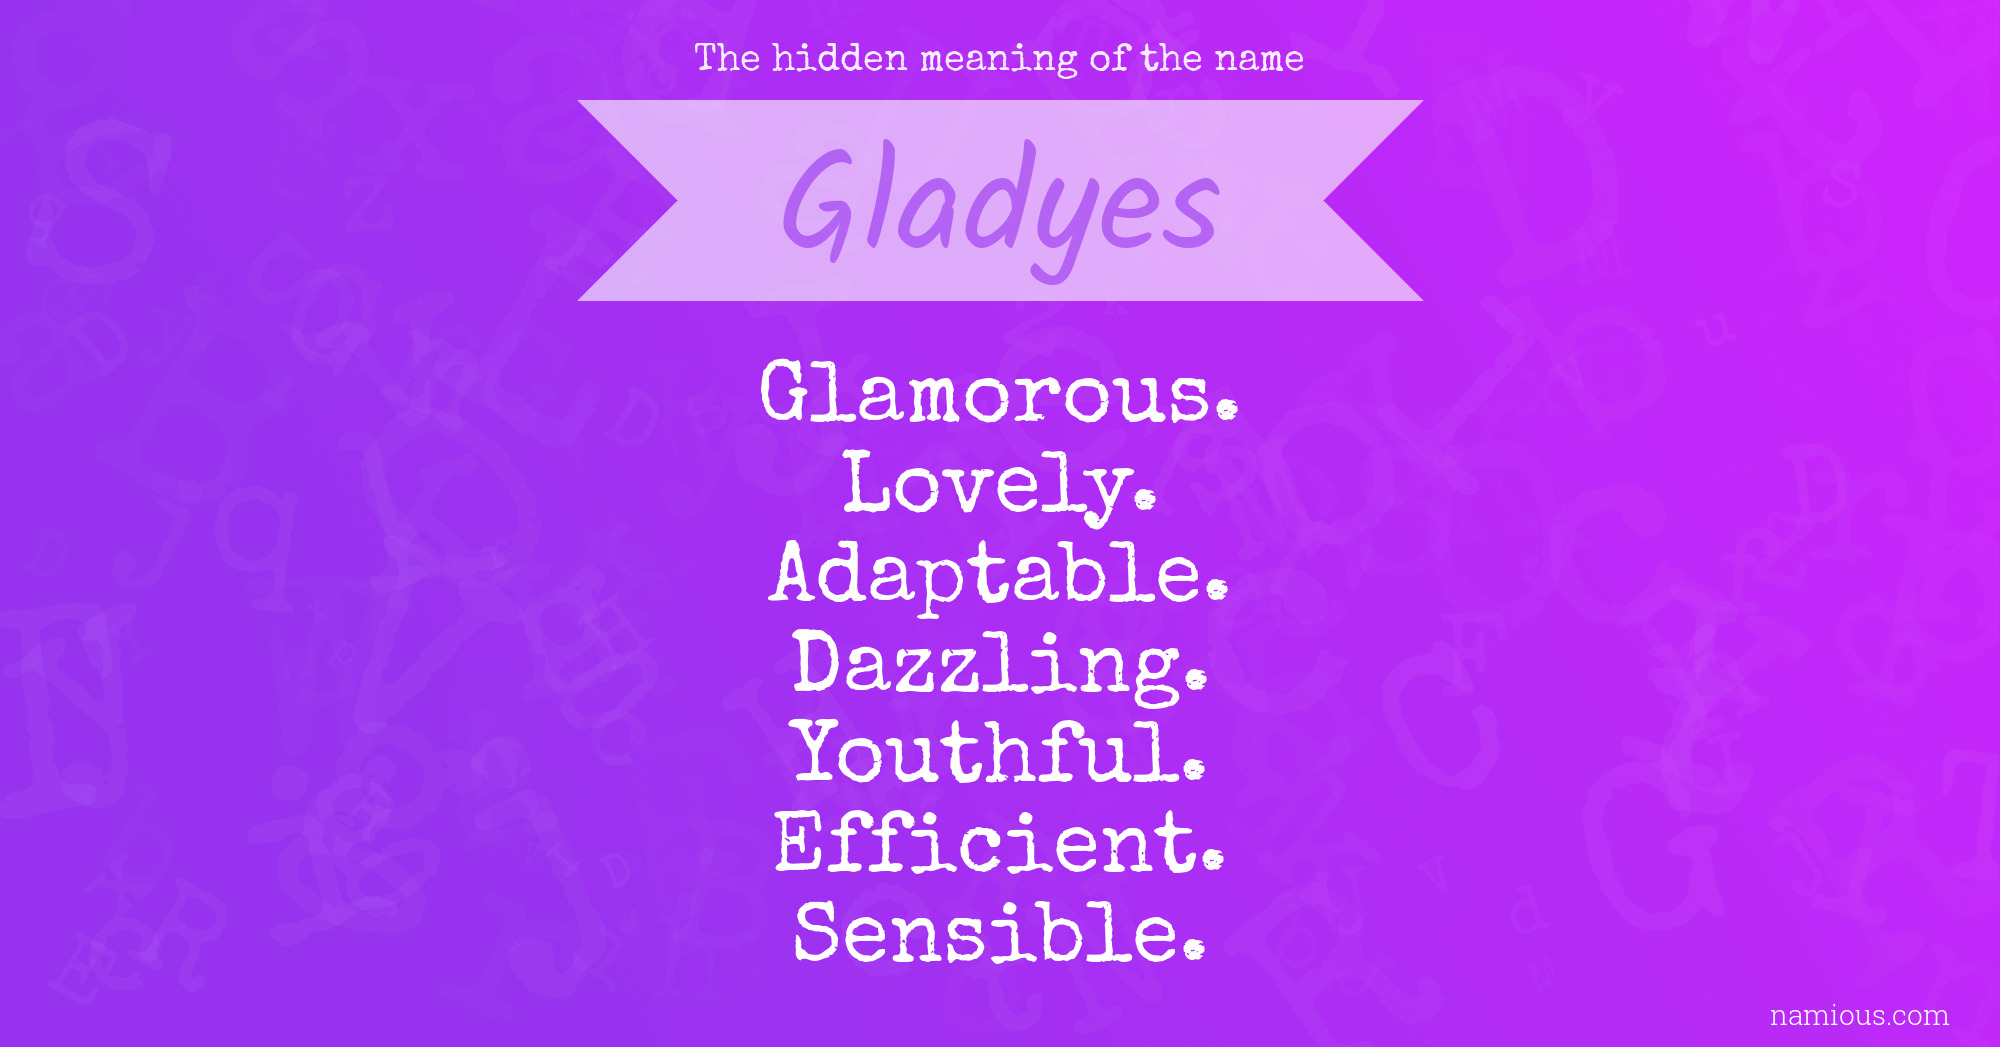 The hidden meaning of the name Gladyes